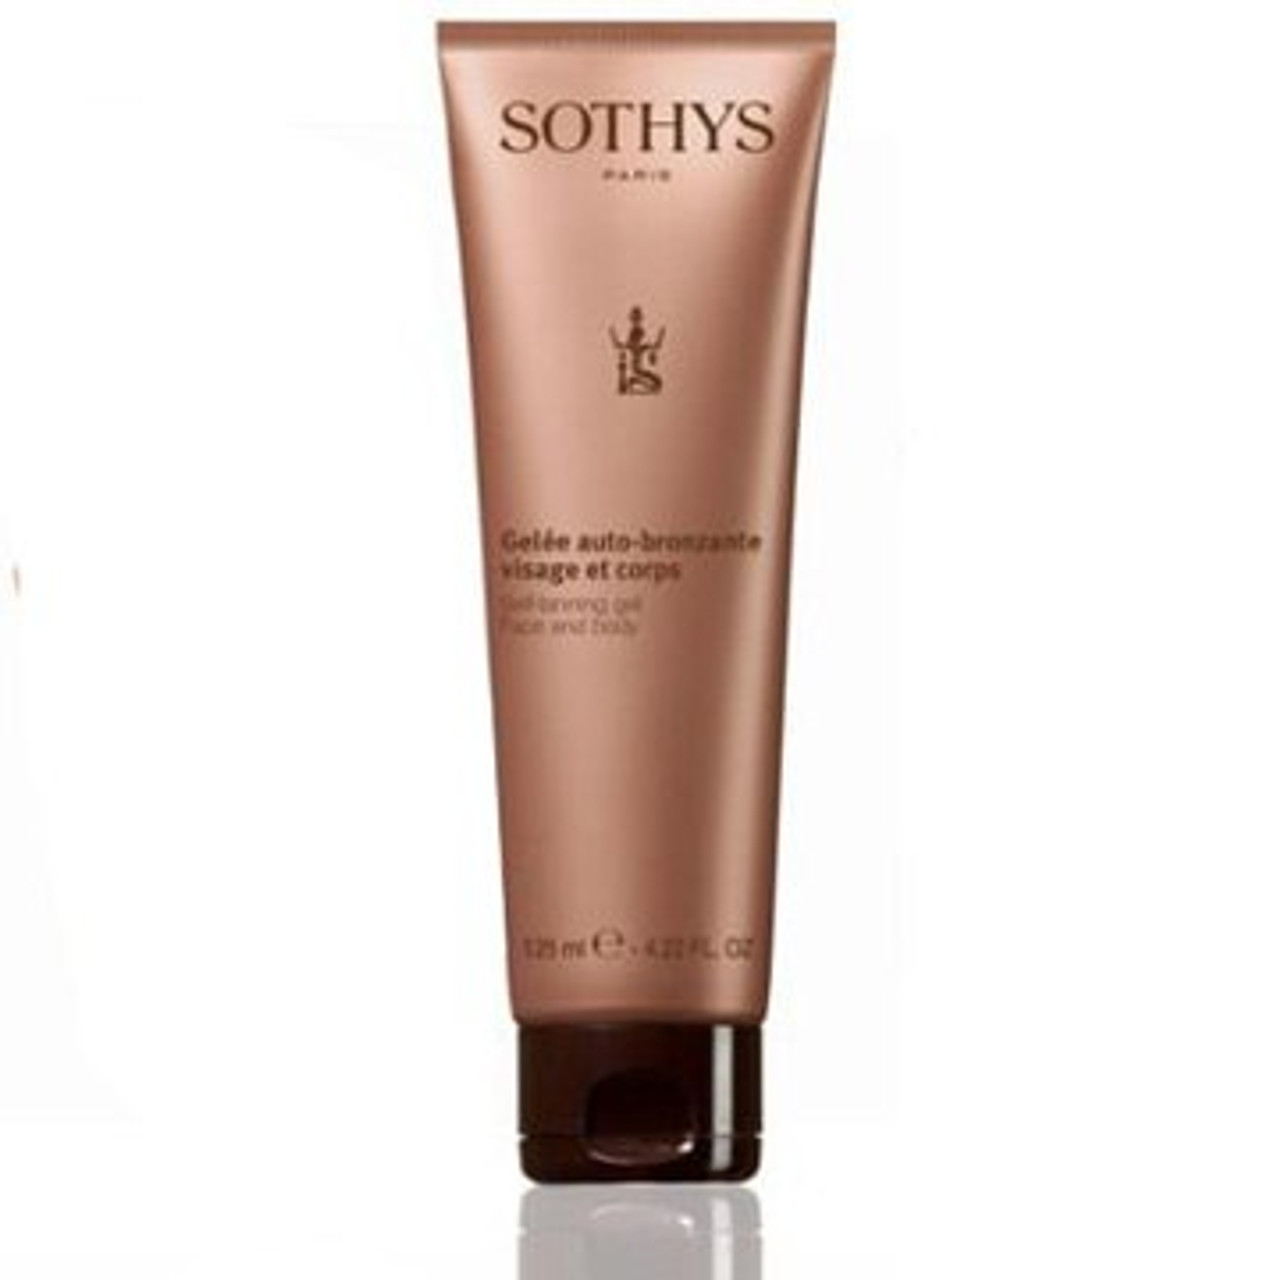 Sothys Self-tanning Gel Face and Body - 4.22 oz